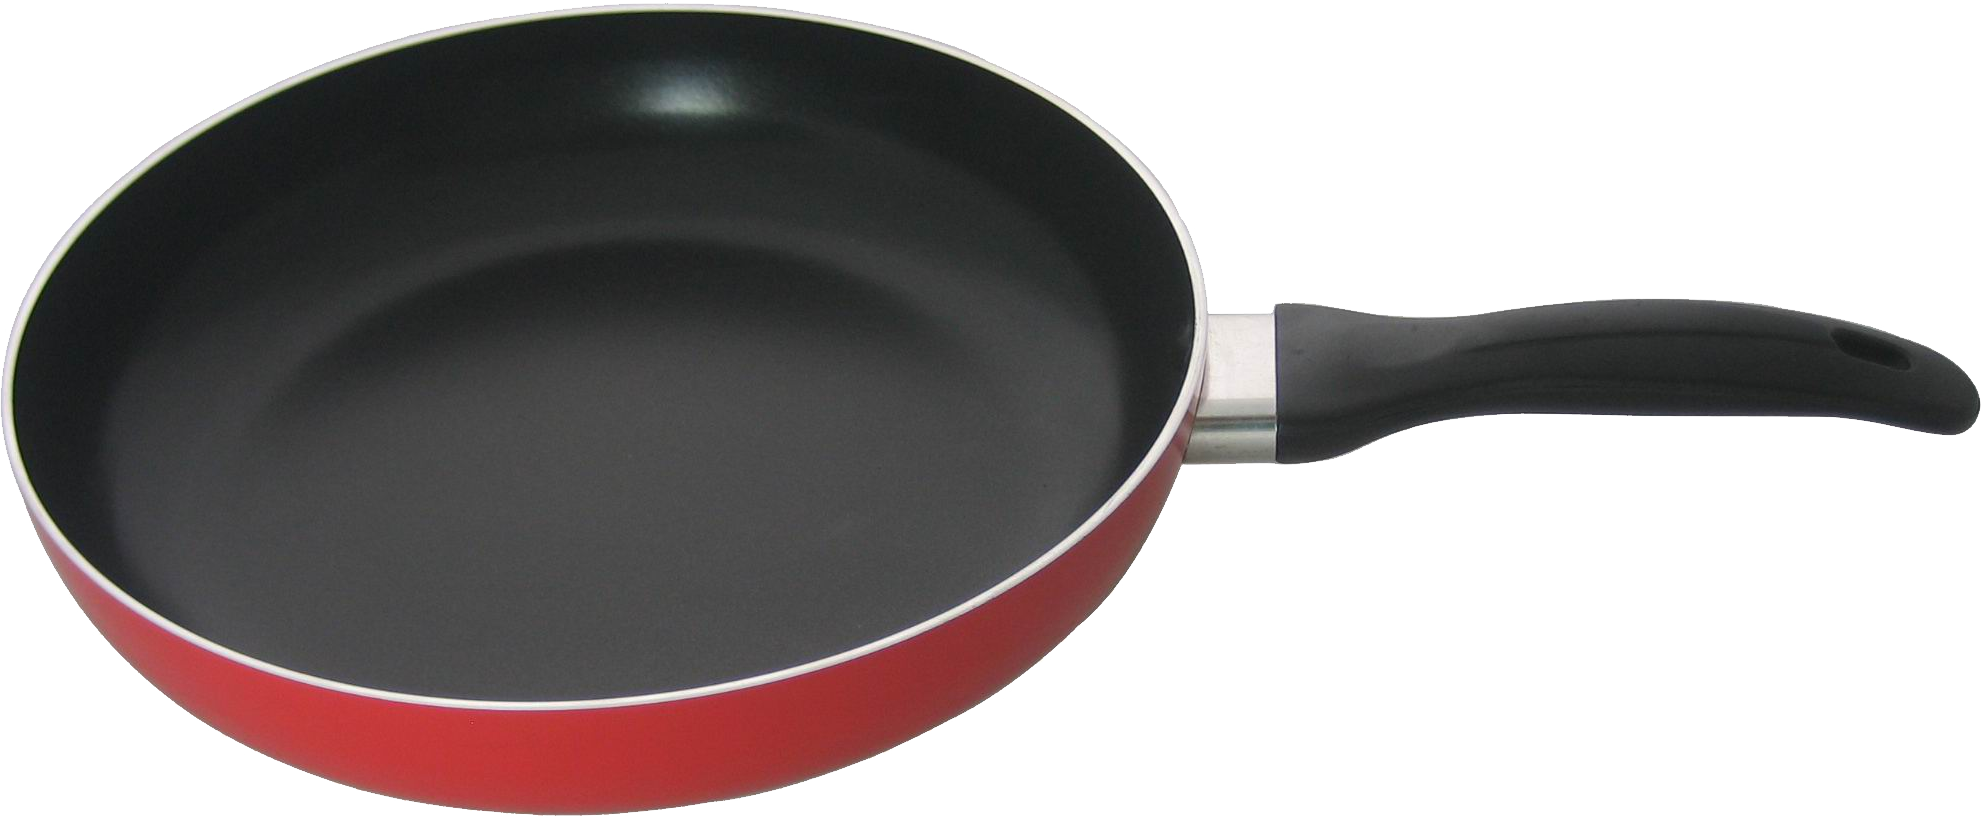 Png images free download. Fries clipart hot frying pan